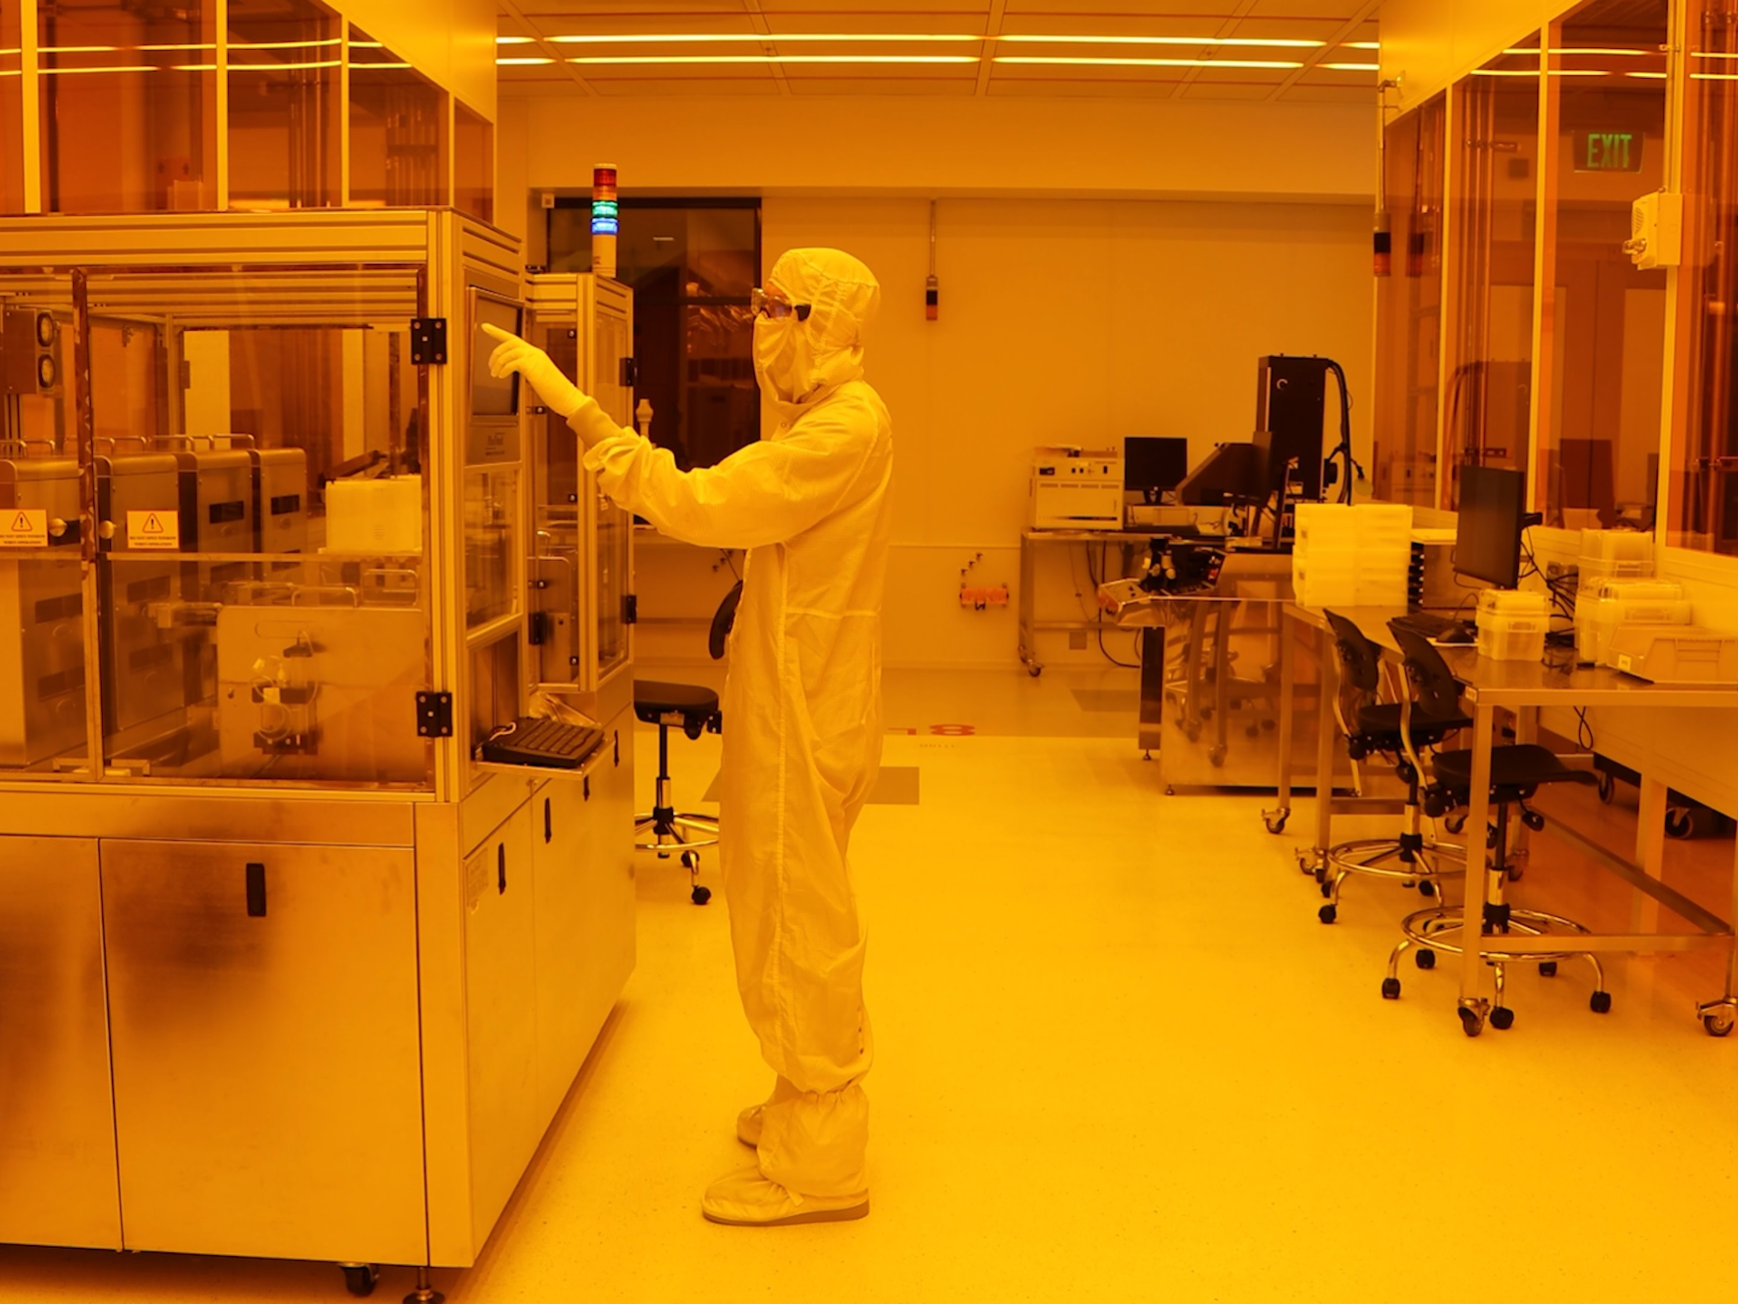 A person working in a cleanroom.